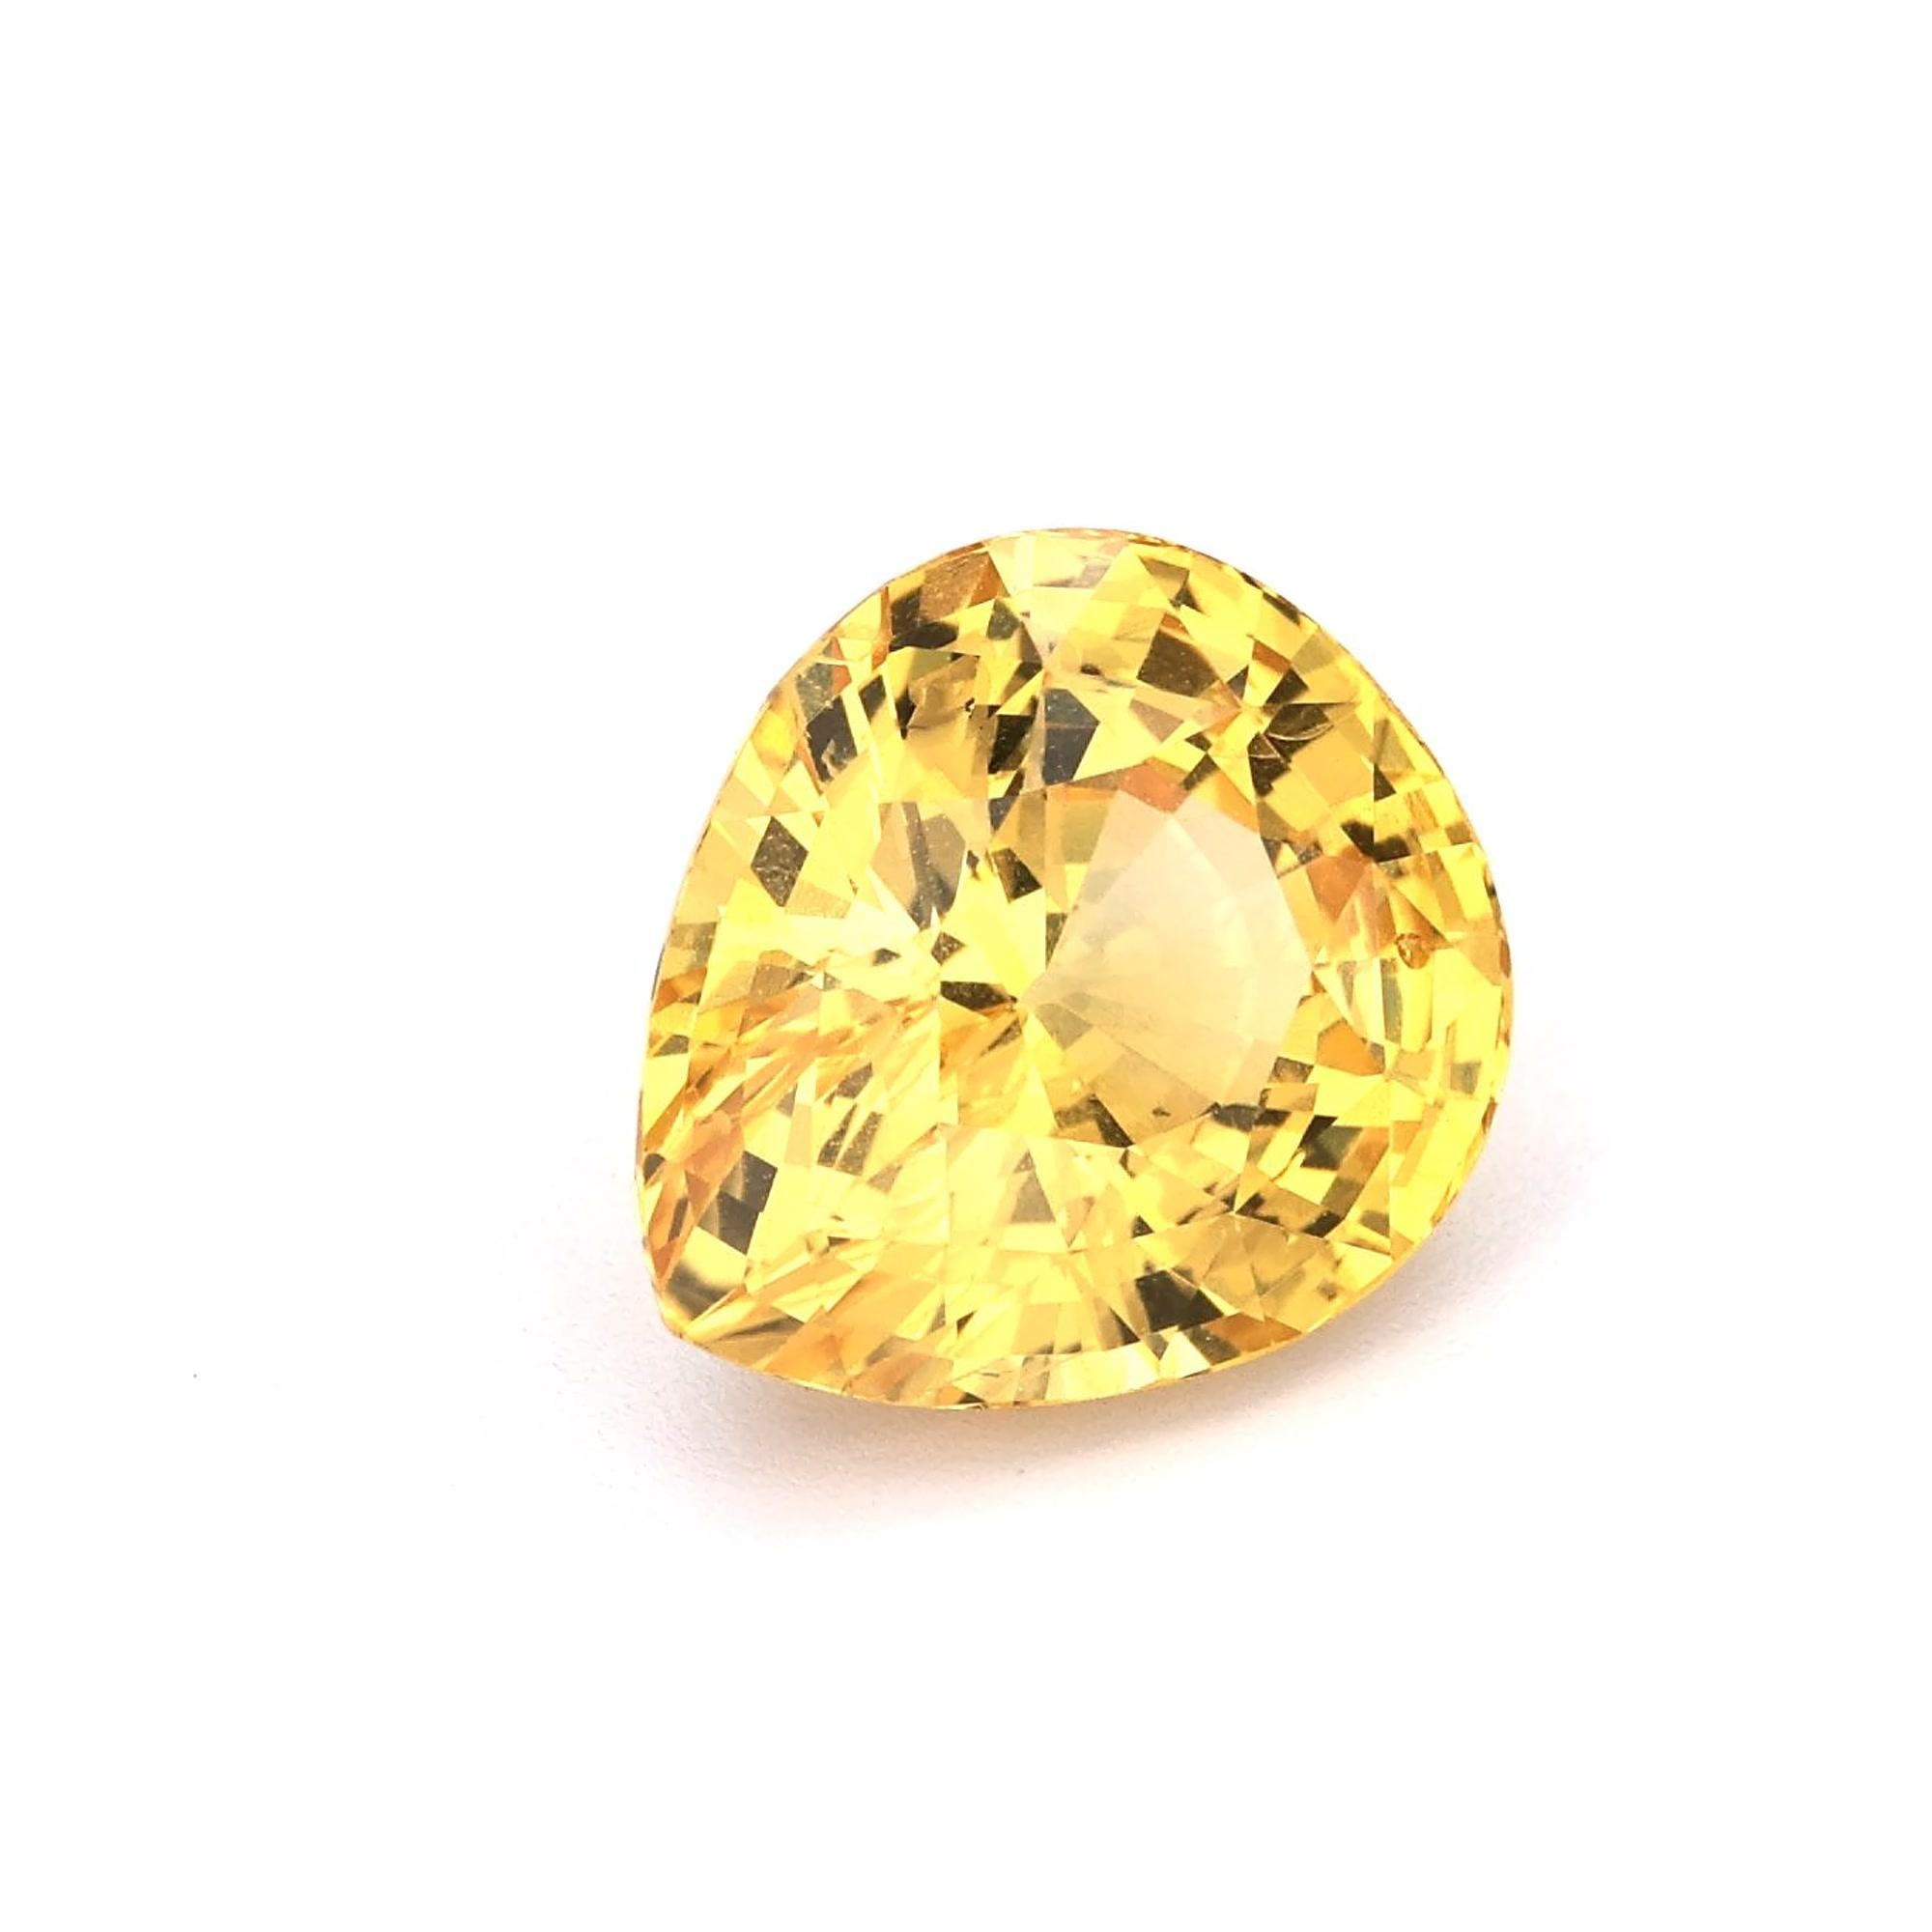 Certified 4.45 ct Natural Yellow Sapphire Pear Shape Ceylon Origin Ring Stone For Sale 4